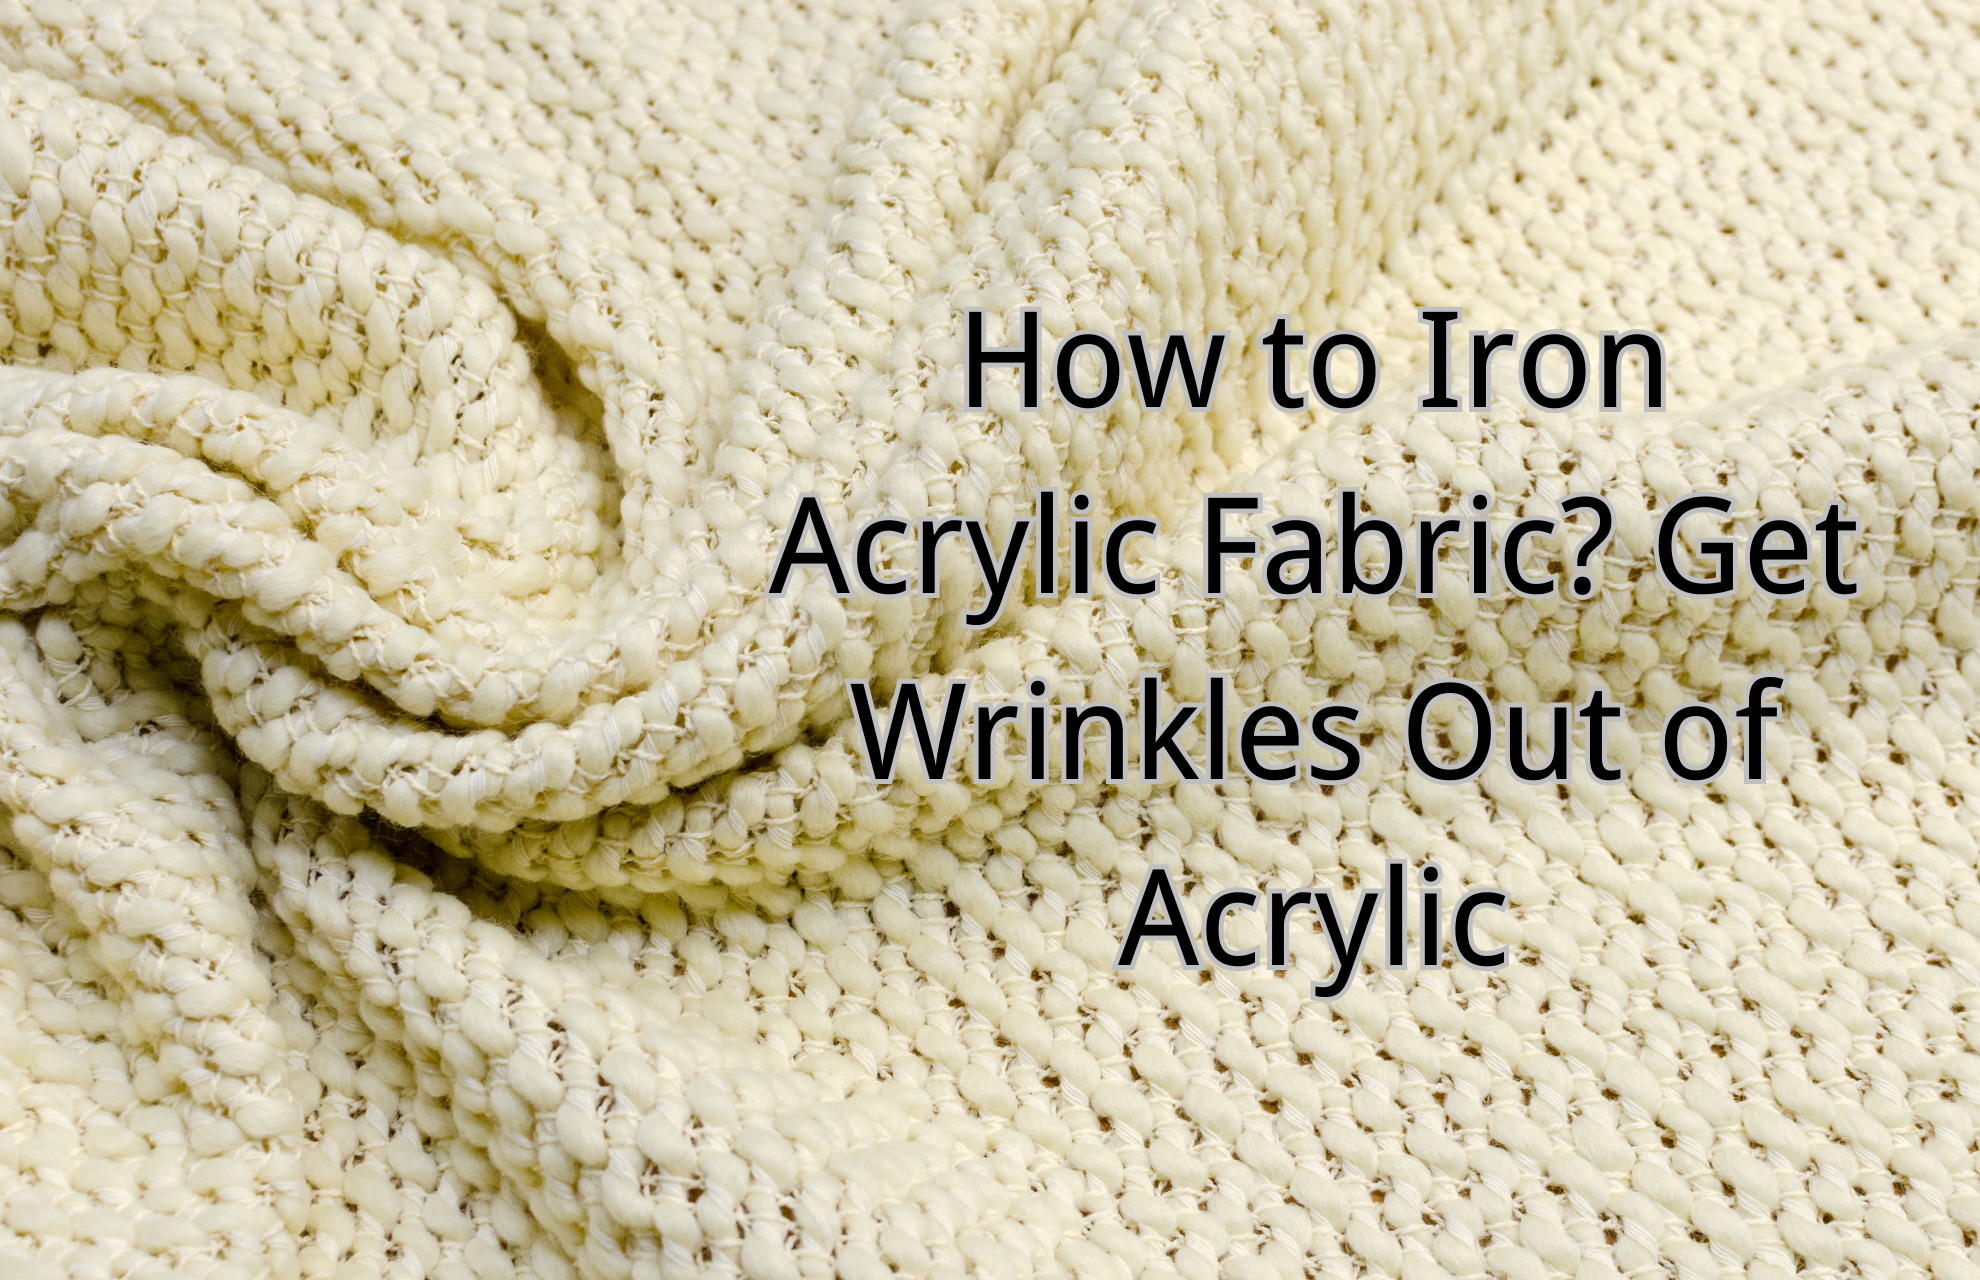 How to Iron Acrylic Fabric? Get Wrinkles Out of Acrylic